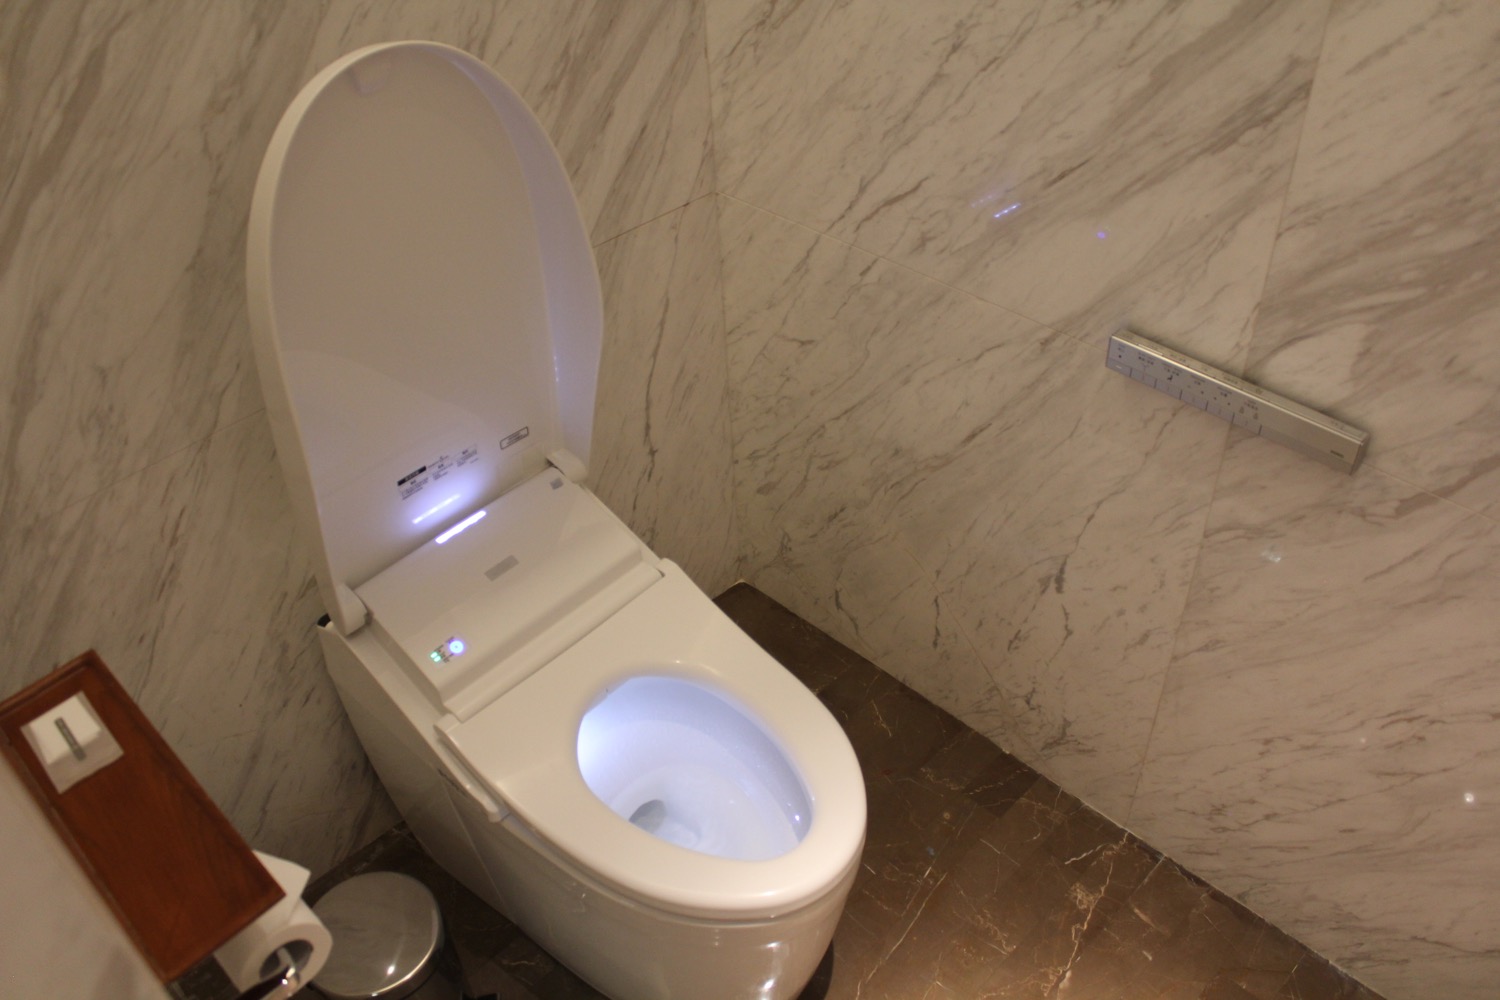 a toilet with a light in the lid